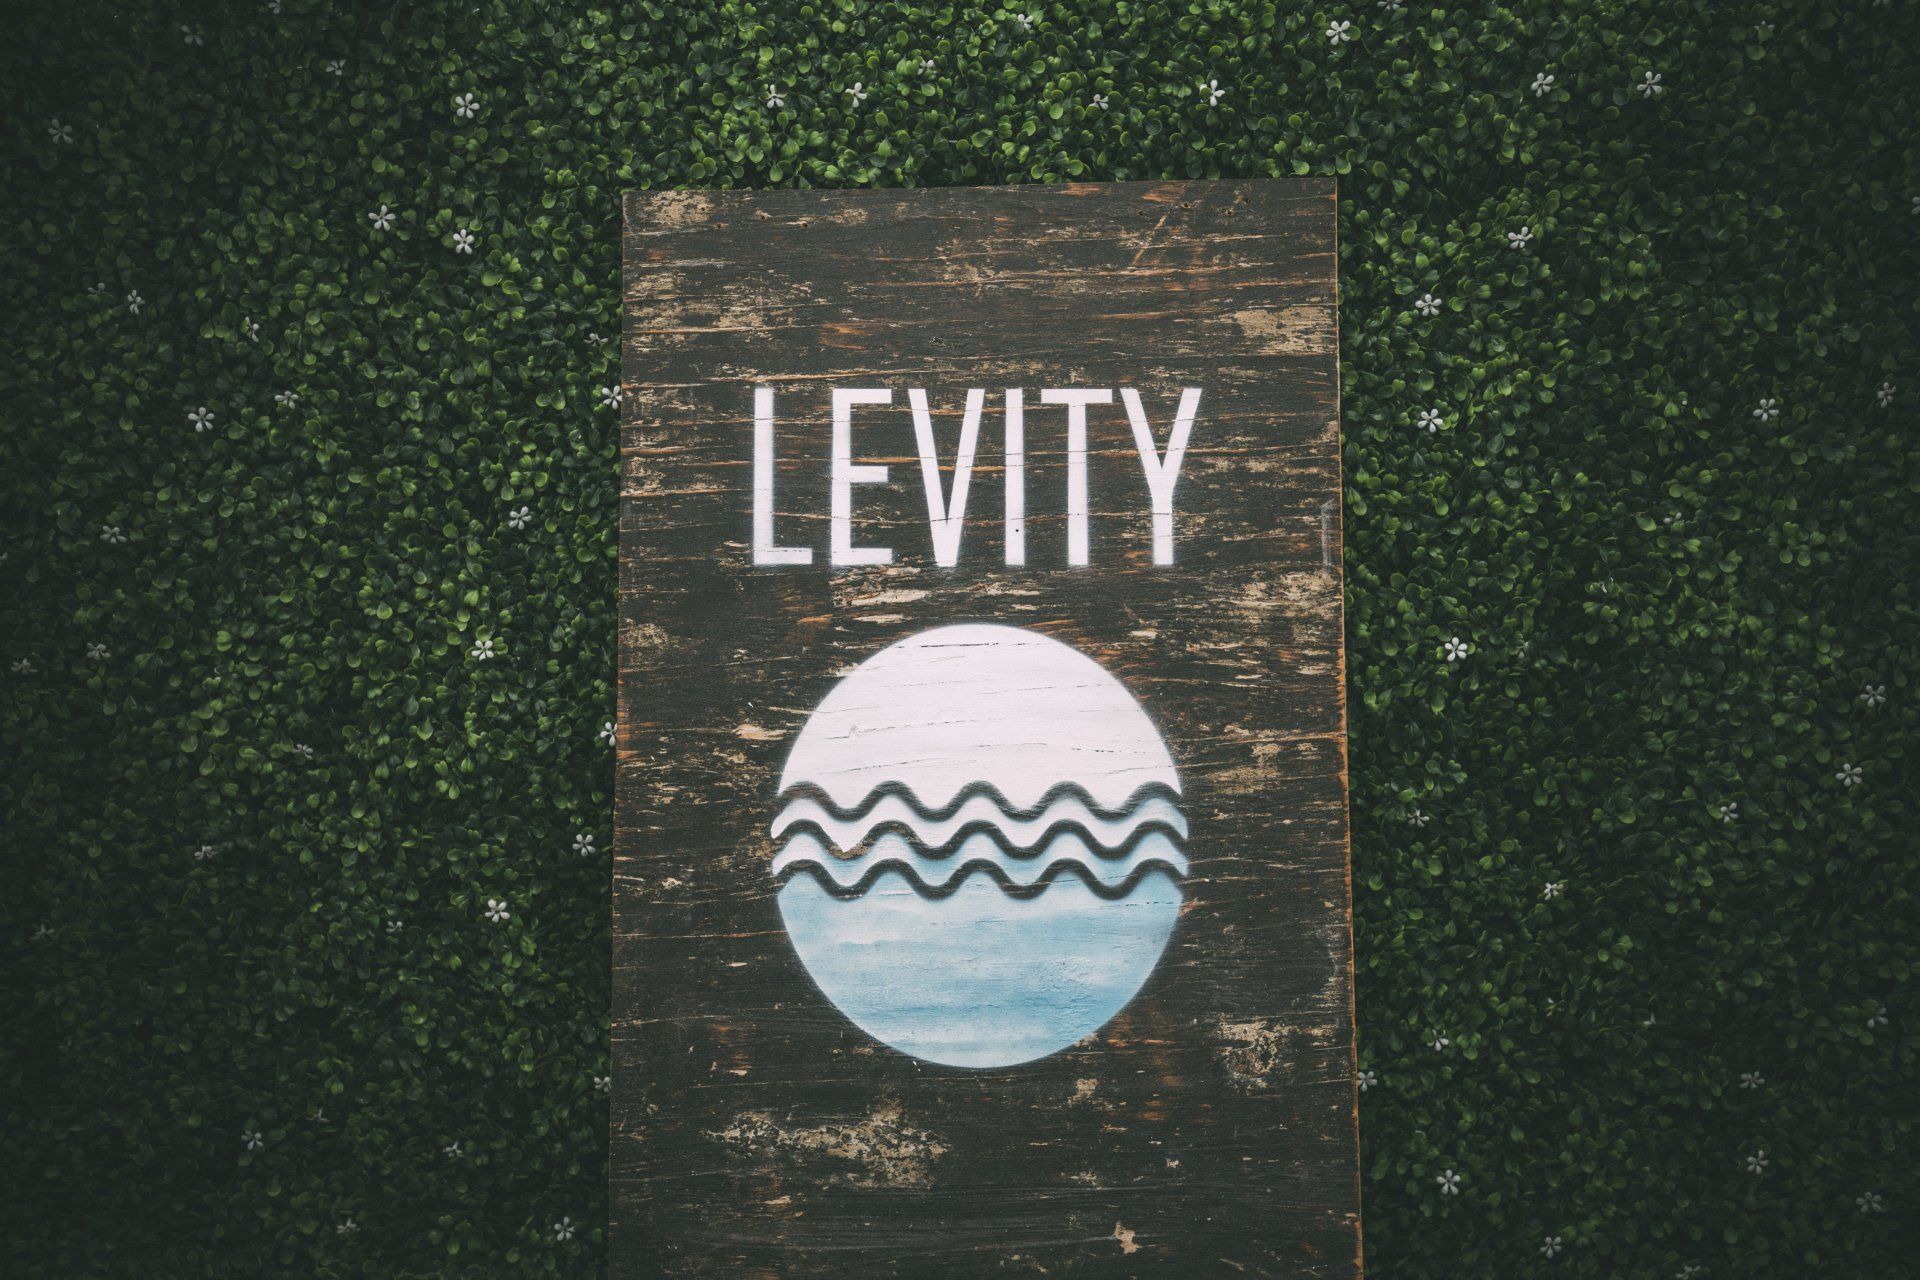 Image of greenery and the Levity logo and lettering on a handmade board